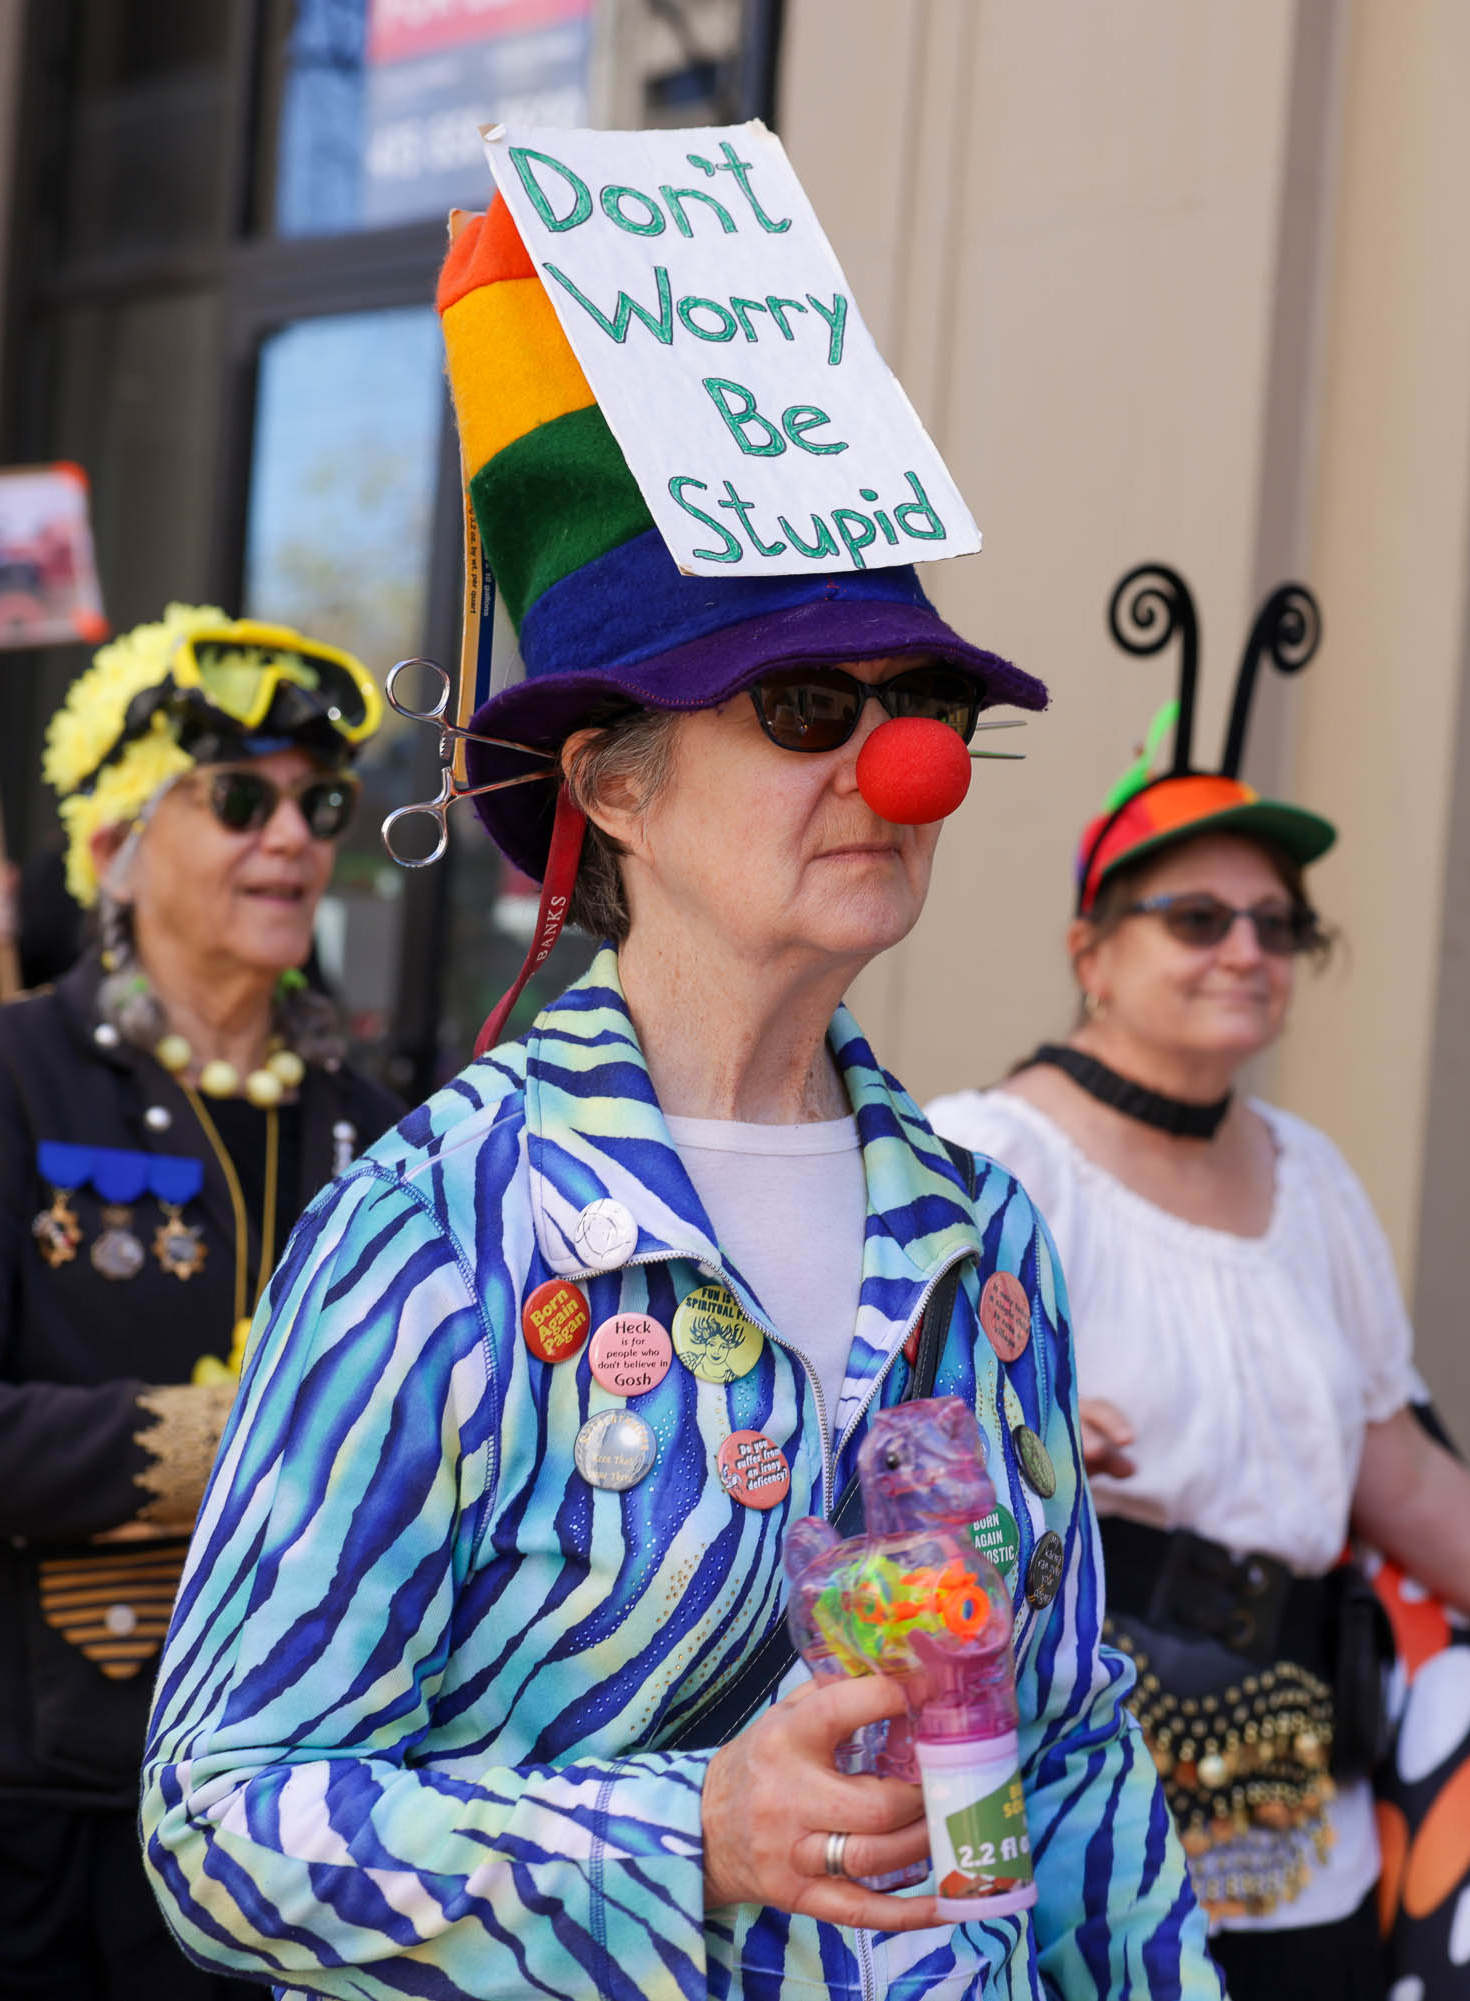 A person in a colorful hat with a &quot;Don't Worry Be Stupid&quot; sign, red nose, and a button-adorned jacket is holding a quirky drink cup.